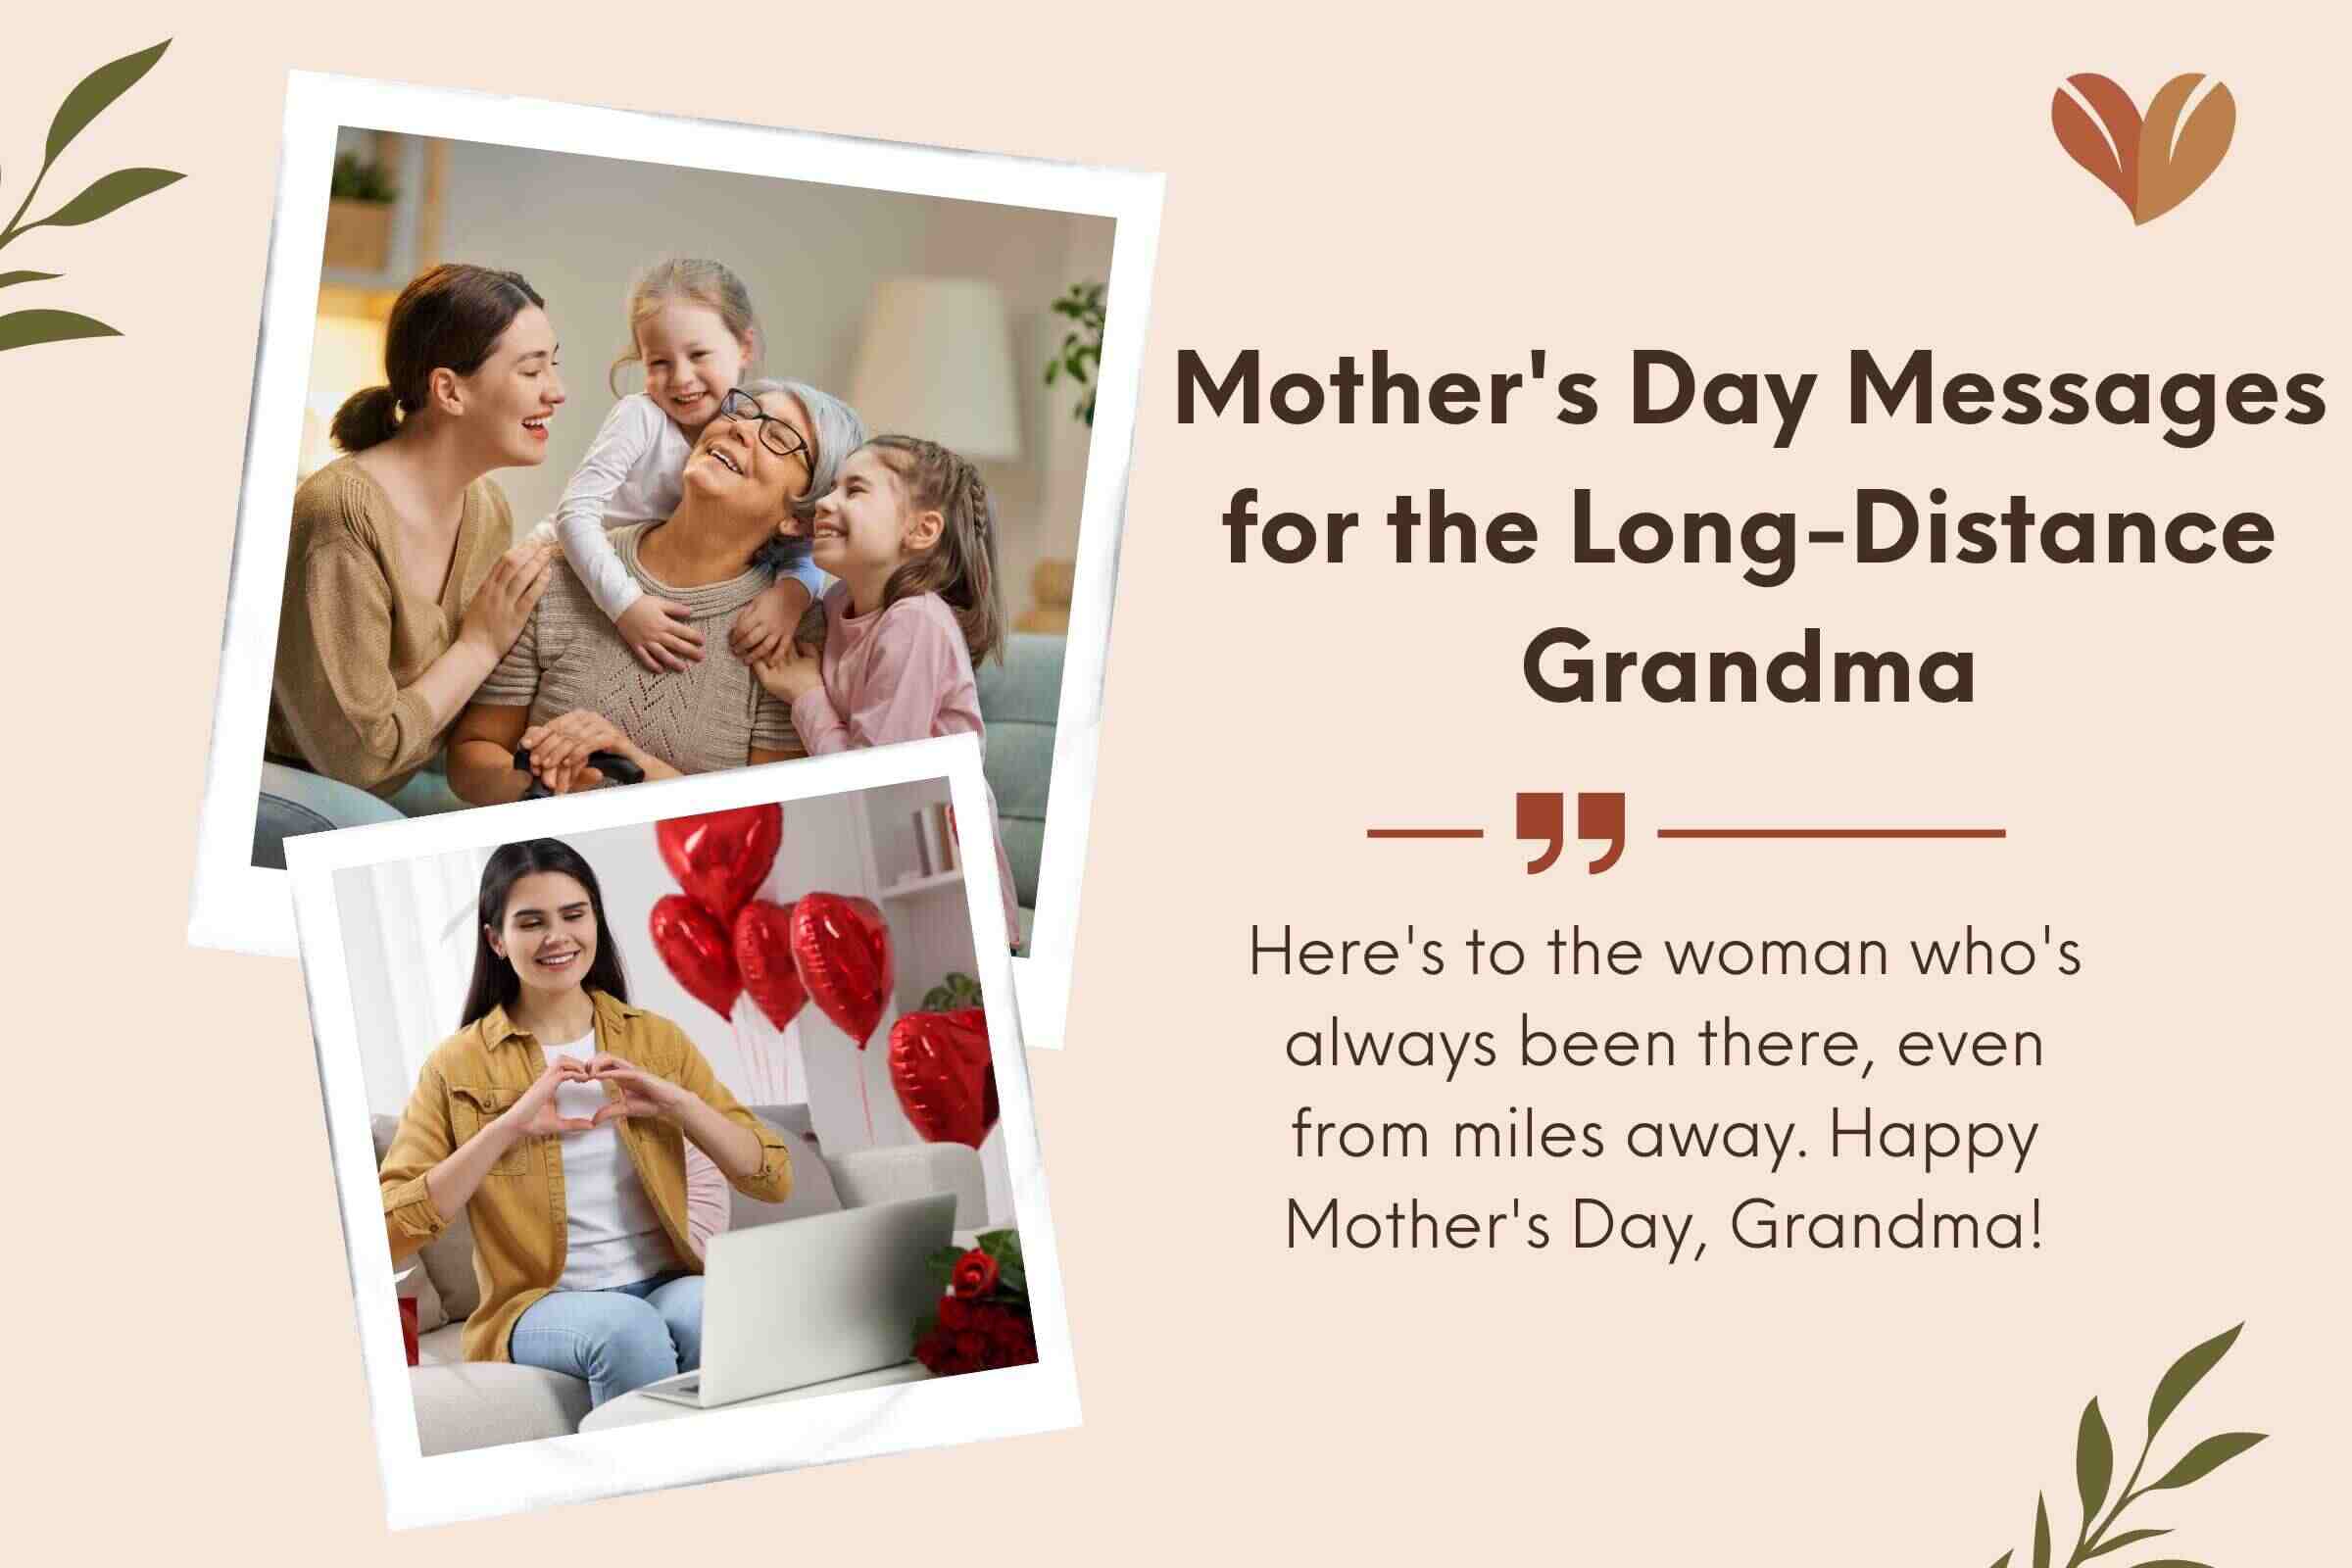 Mother's Day Messages for the Long-Distance Grandma